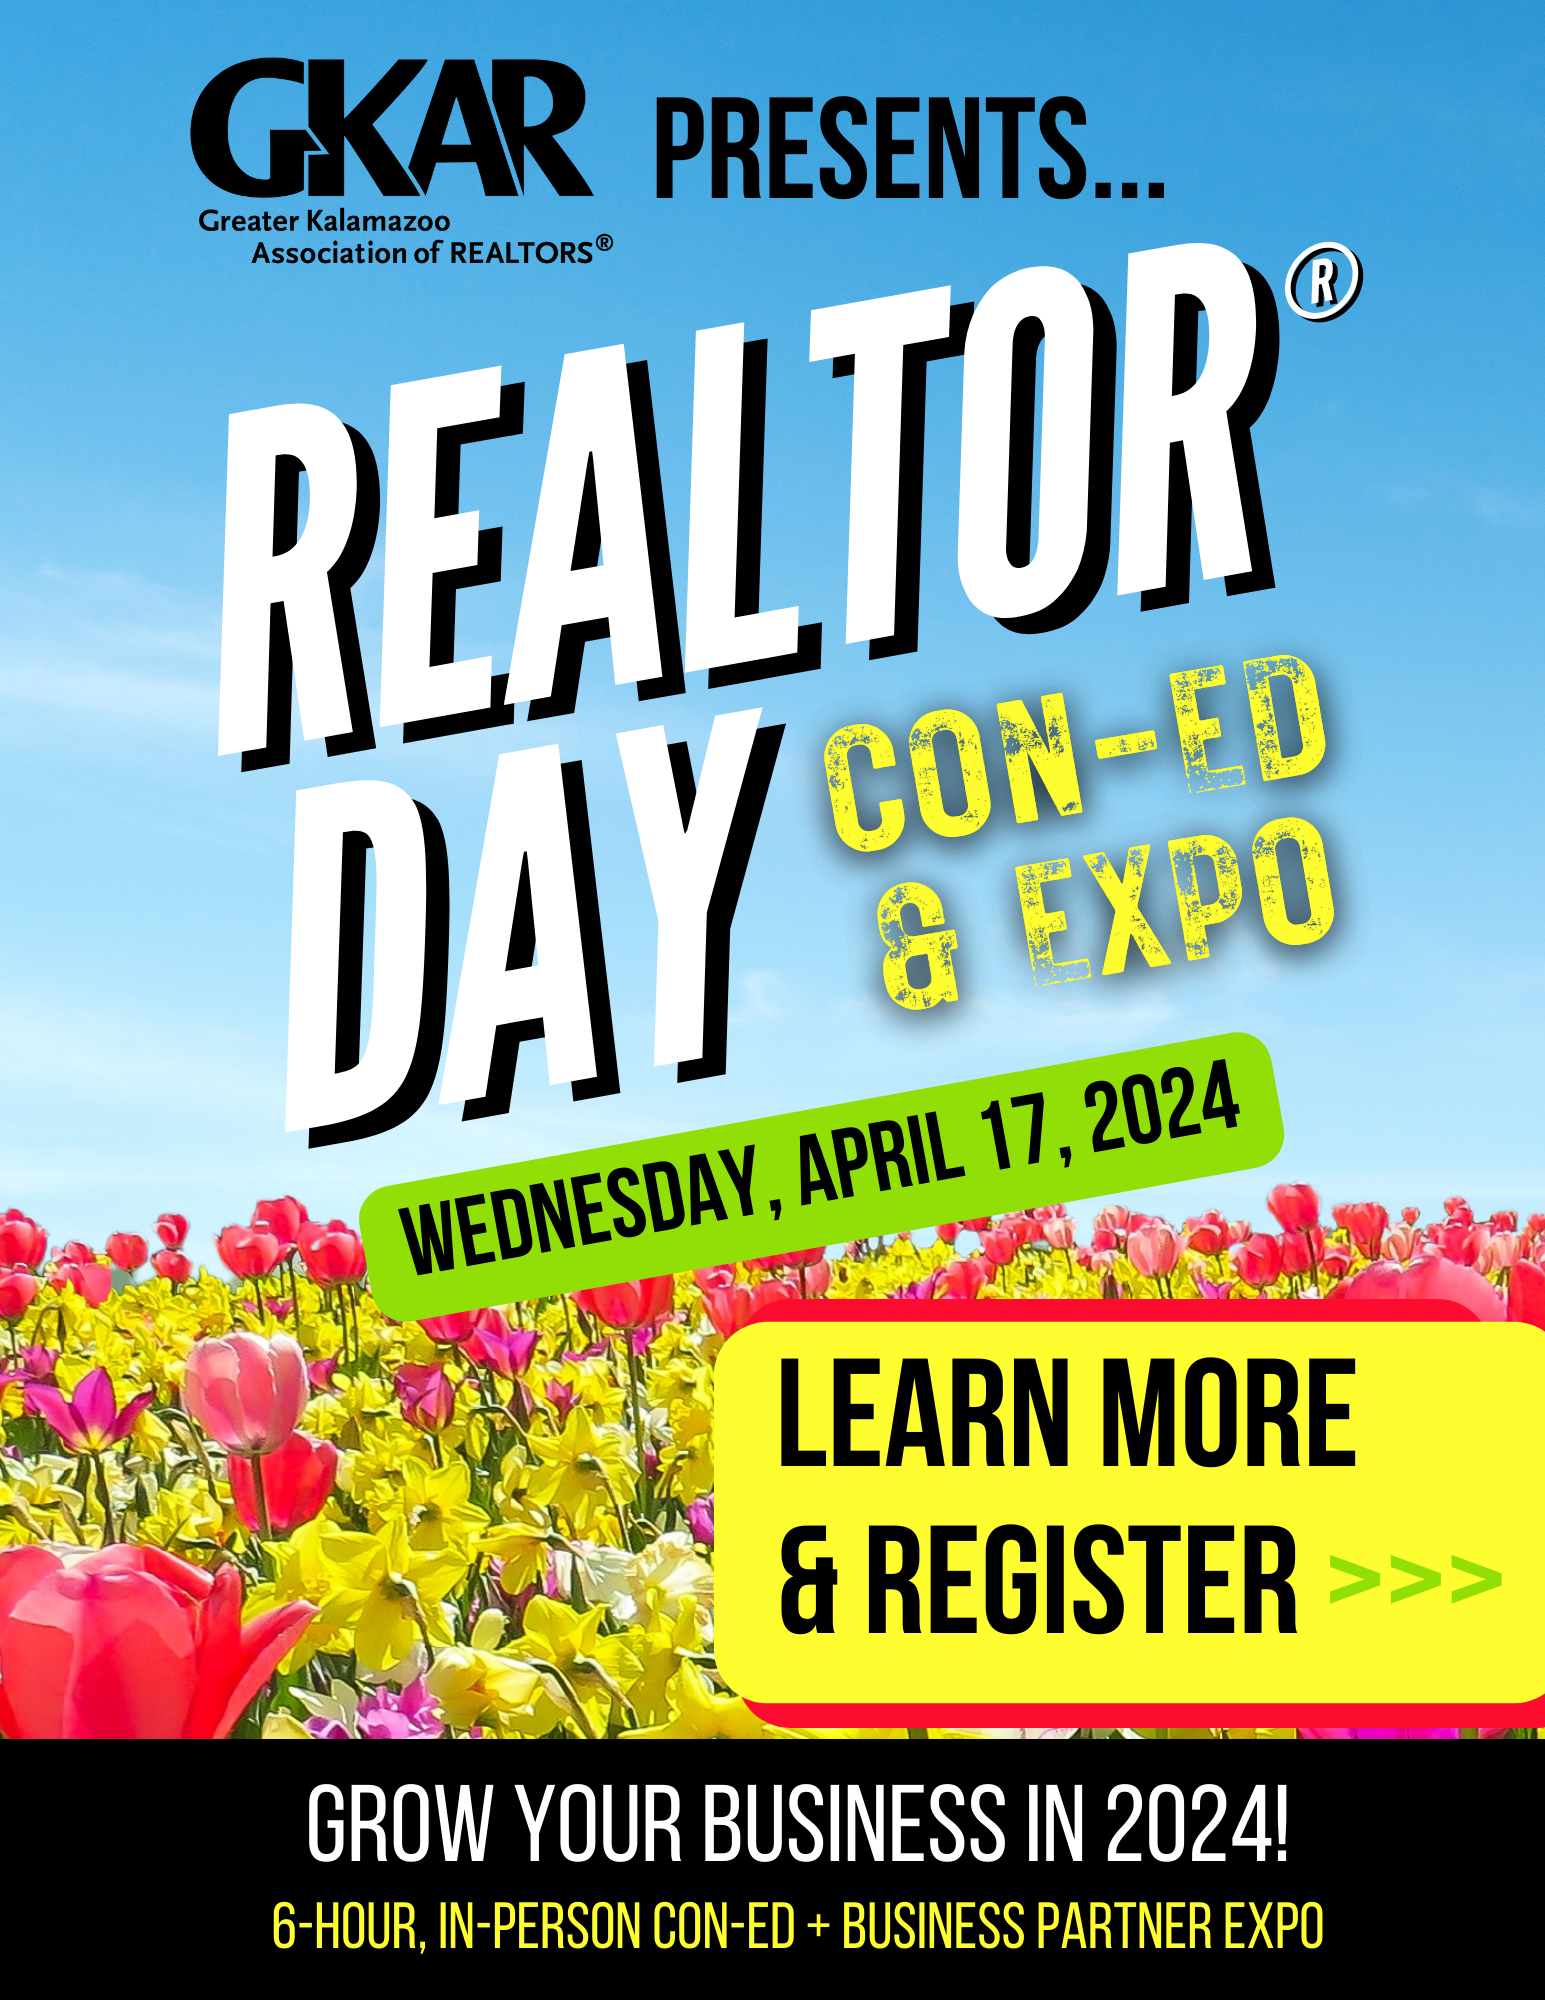 Learn more and register for REALTOR Day